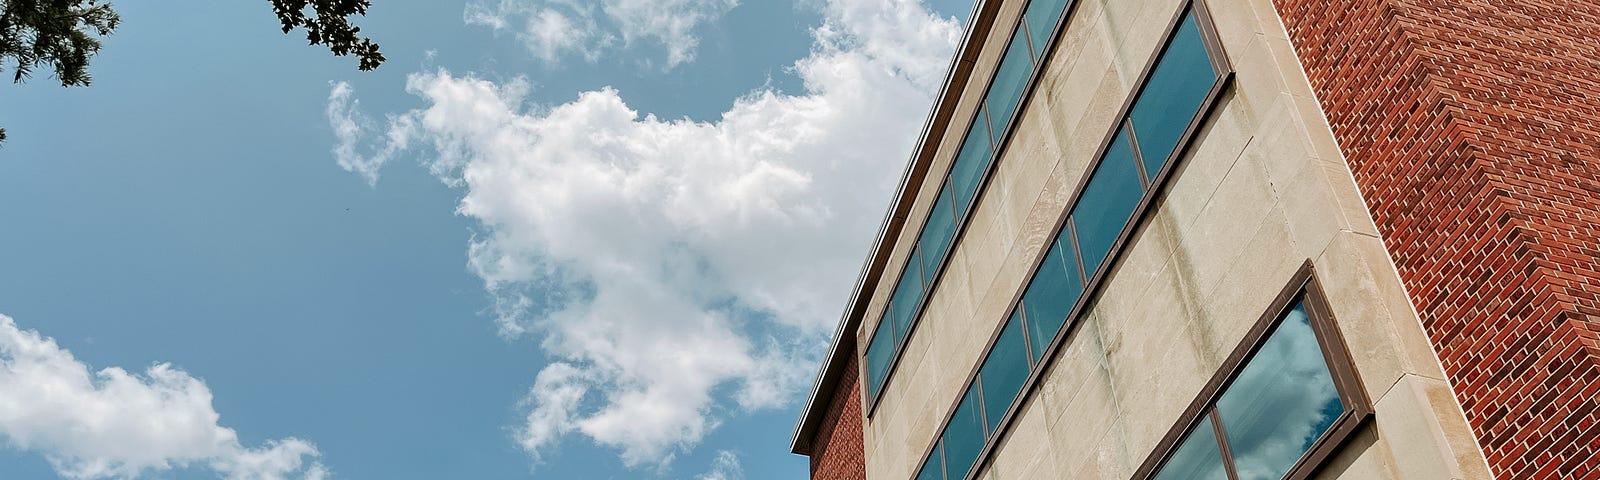 Clouds in the sky reflect in the windows of Canfield Administration Building